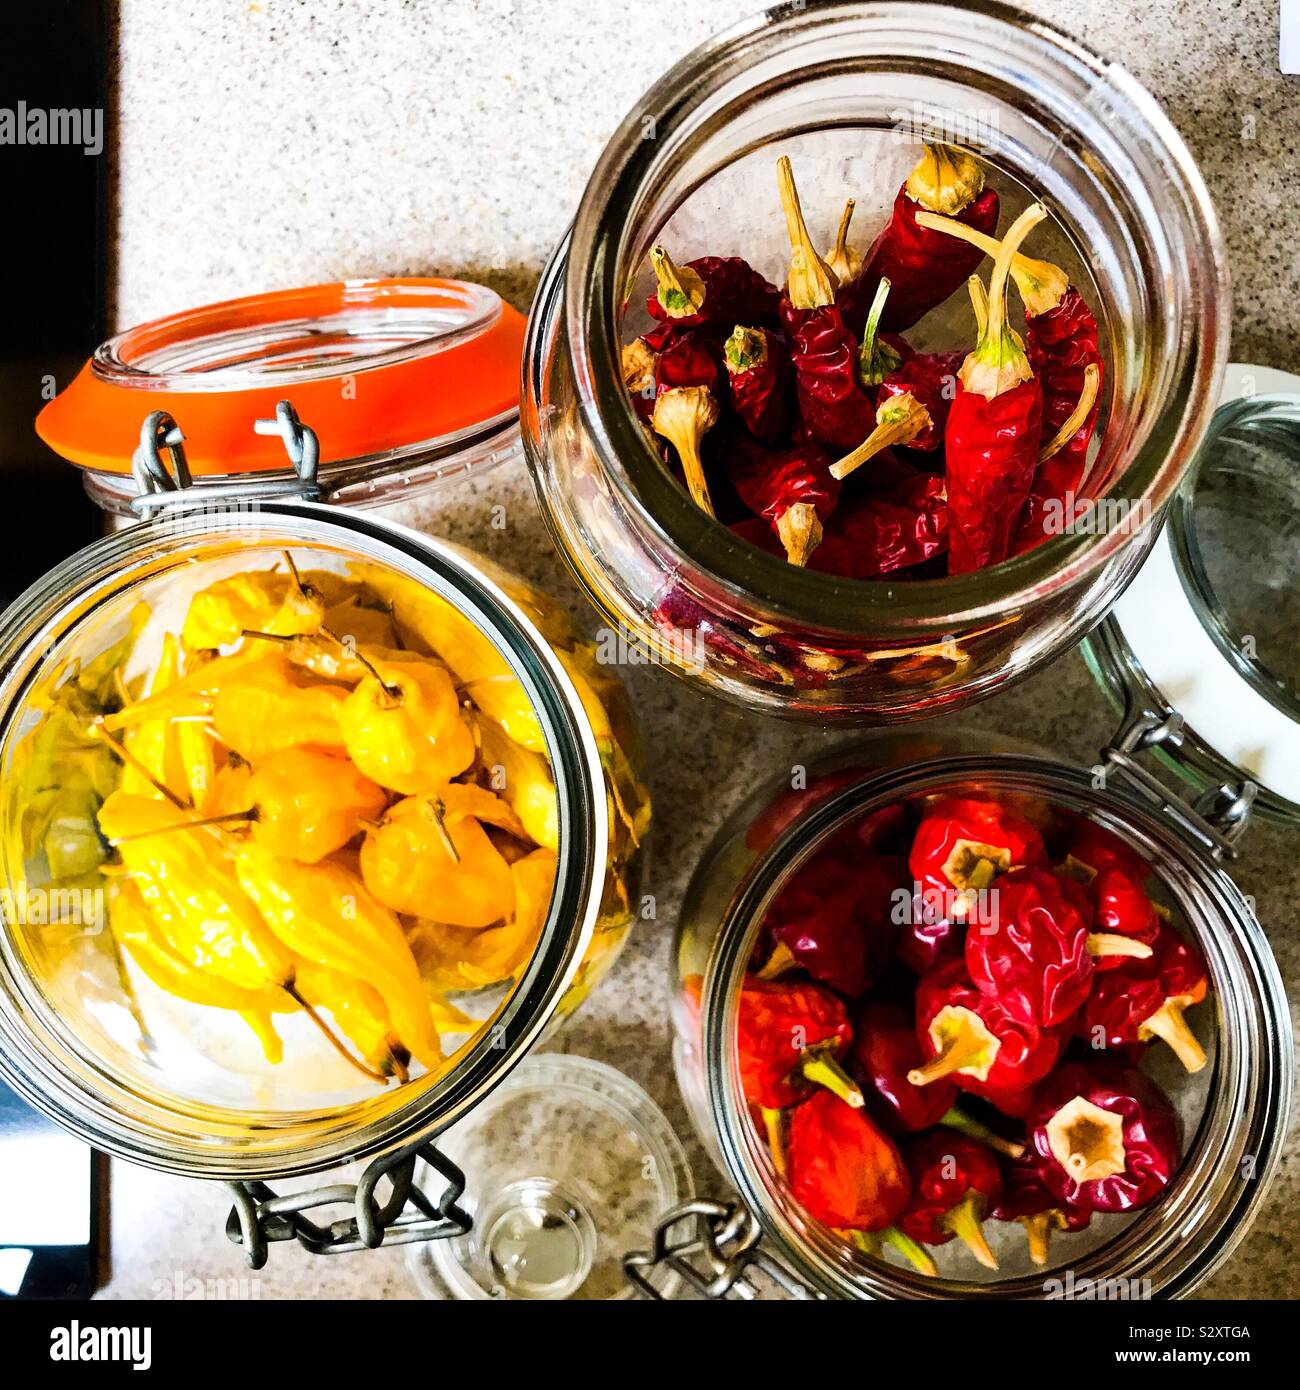 Red and yellow chillis in open Kilner jars on Corian kitchen work surface Stock Photo